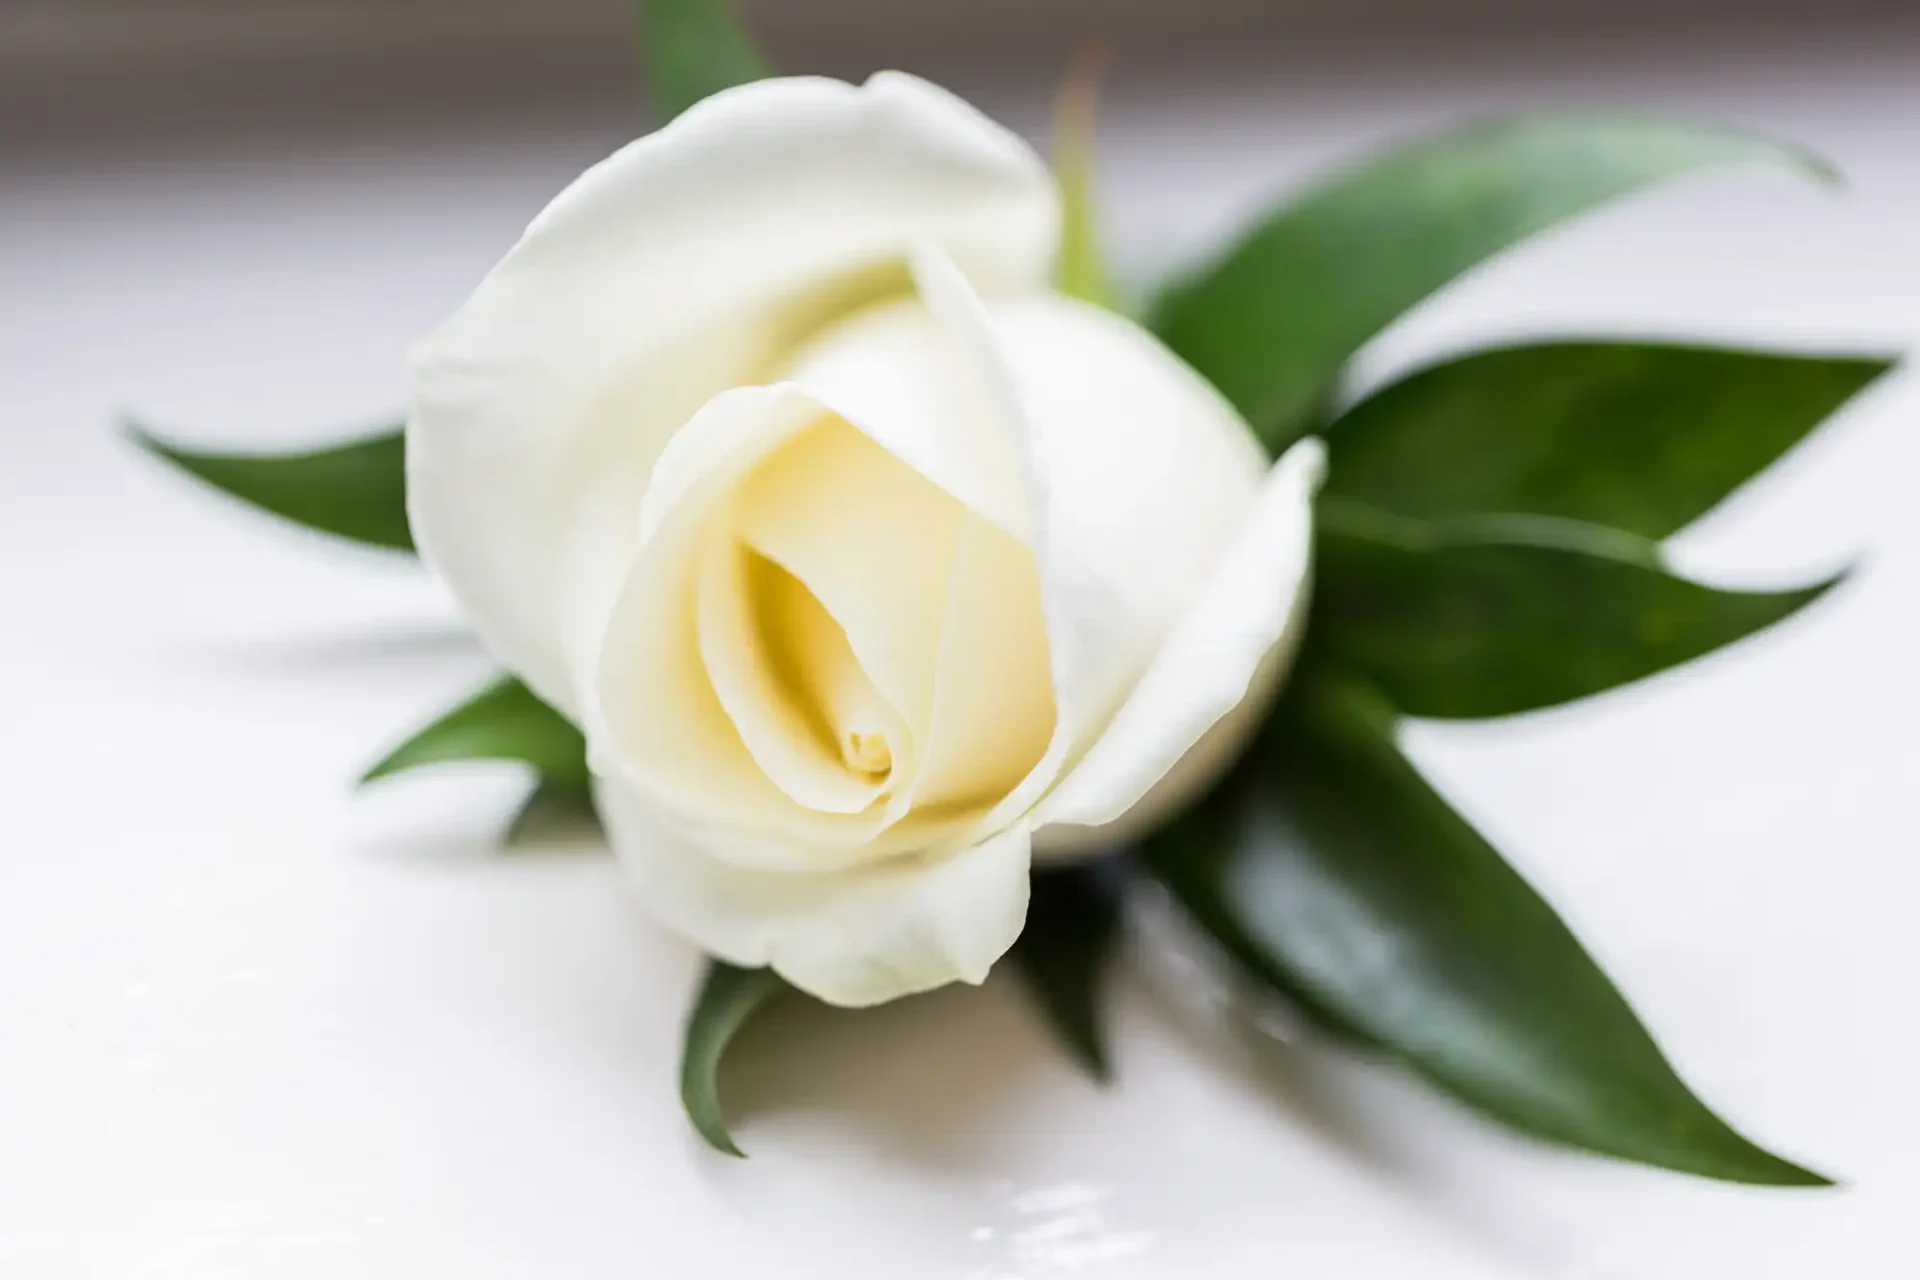 A single white rose with a soft focus on its swirling petals, lying against a bright white background with green leaves.